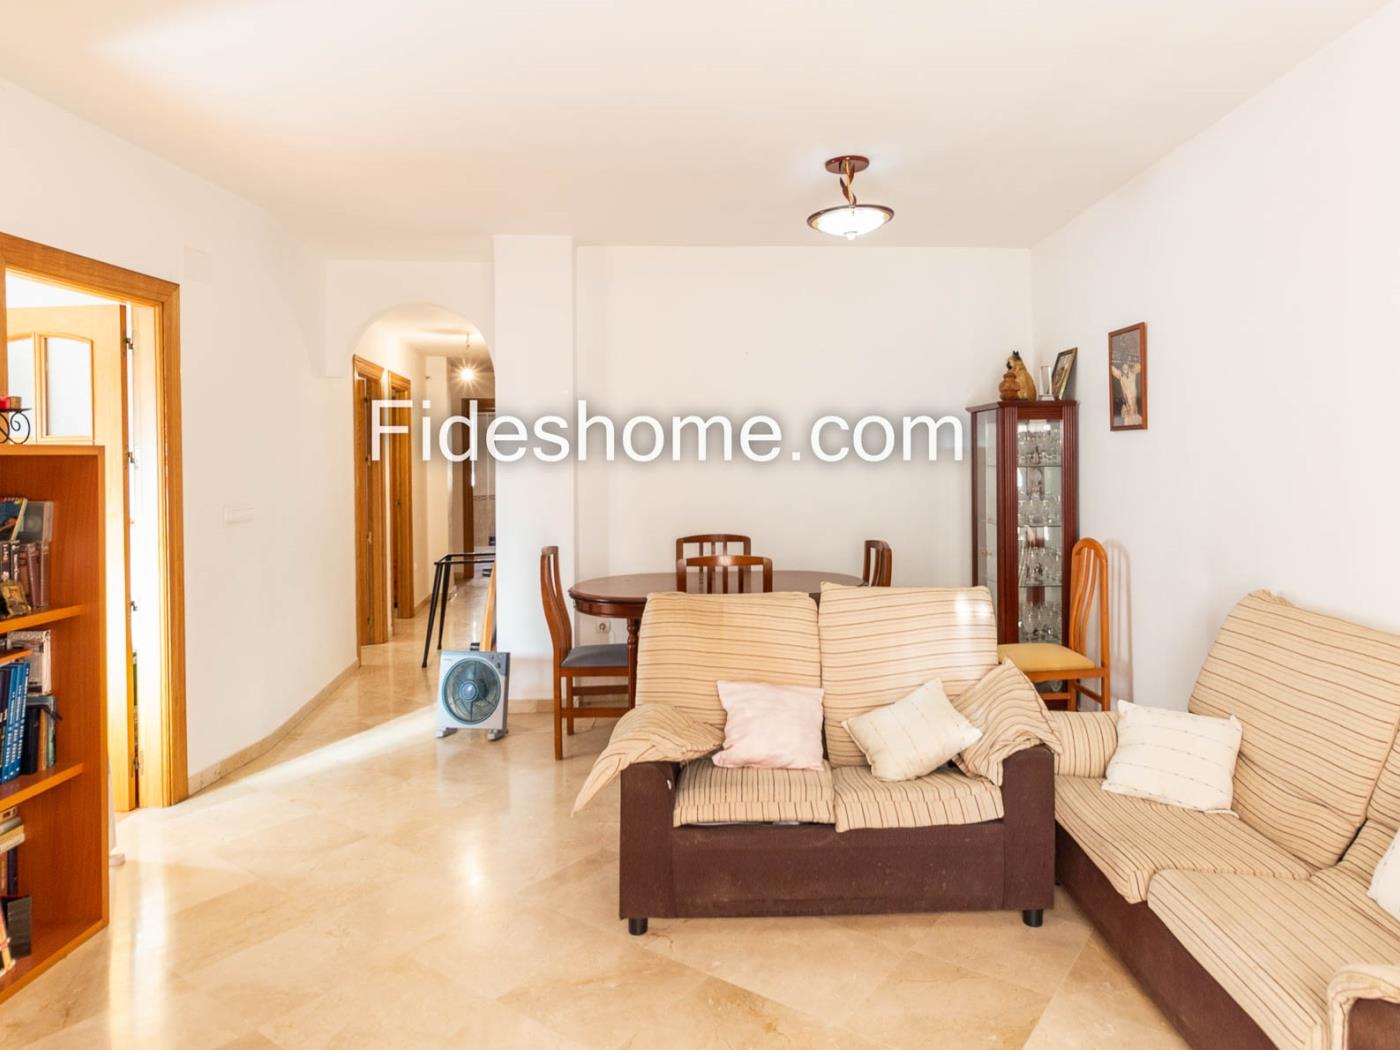 Magnificent 3-bedroom apartment with elevator, garage, storage room, and heating in Órgiva